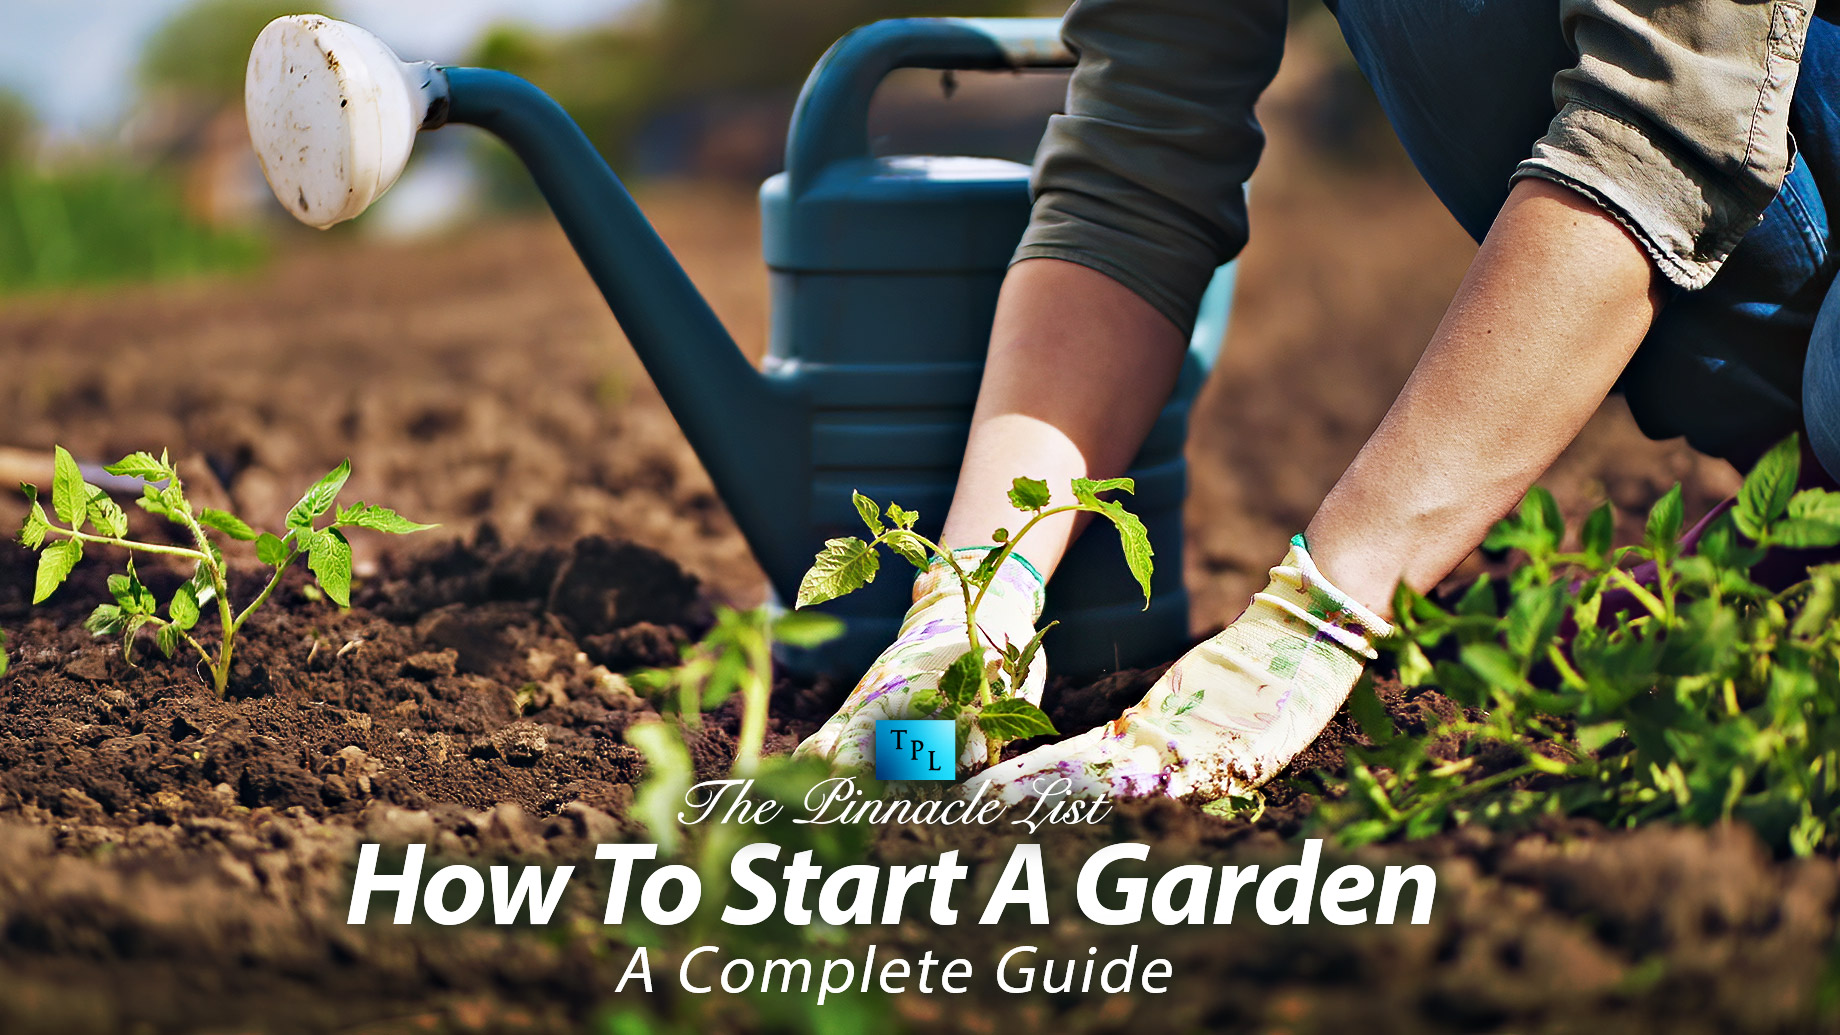 How To Start A Garden: A Complete Guide